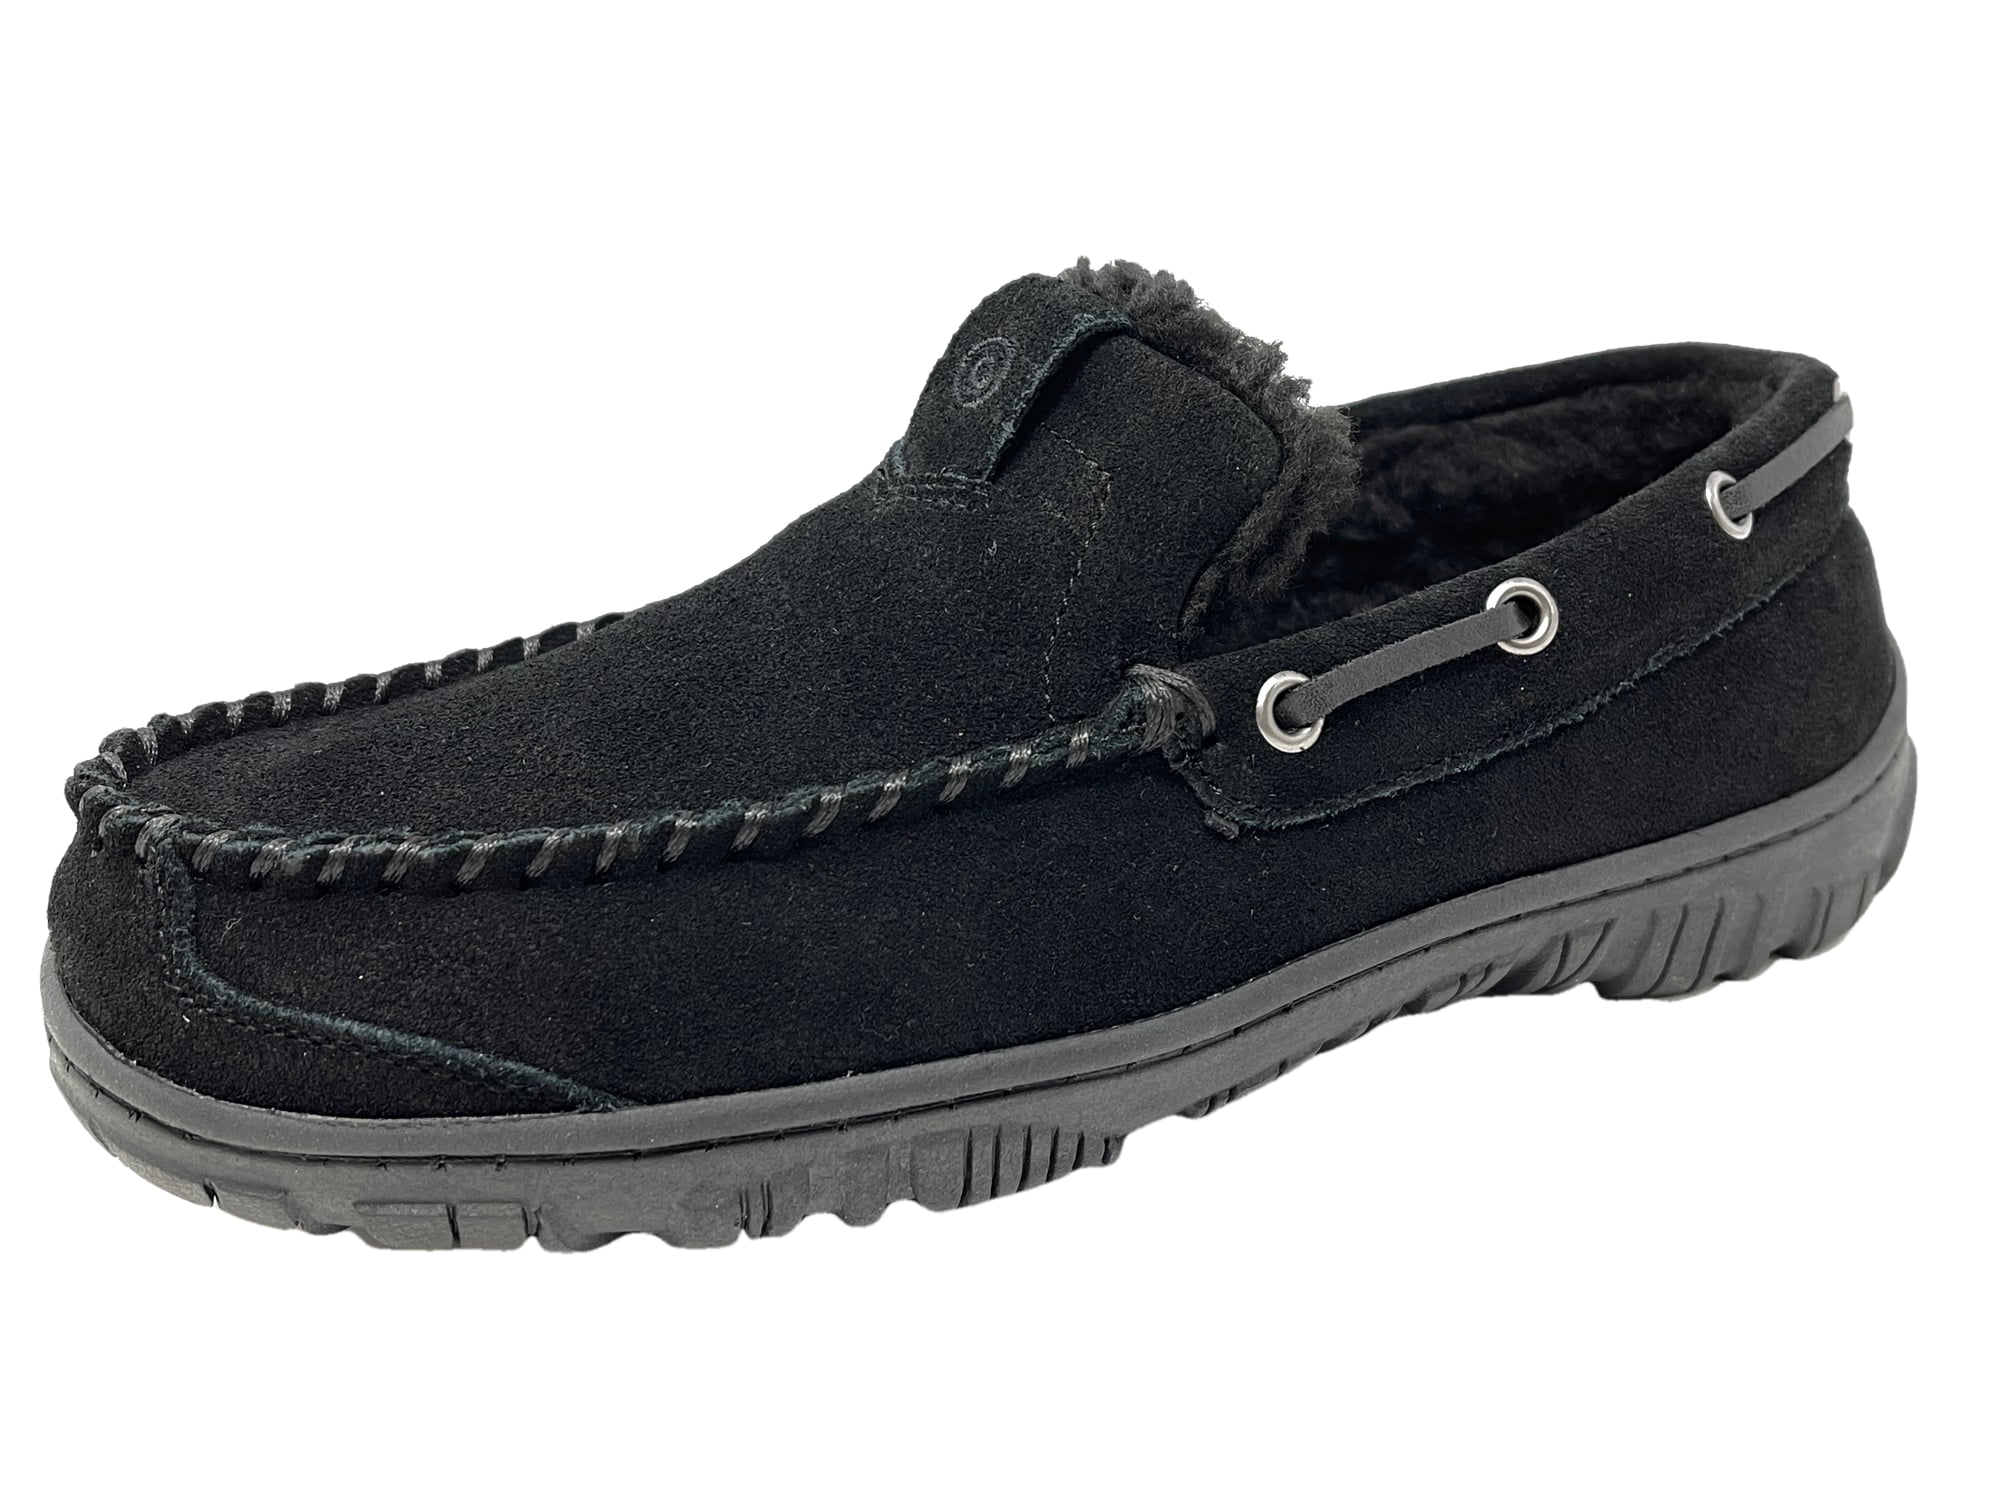 clarks mens house shoes